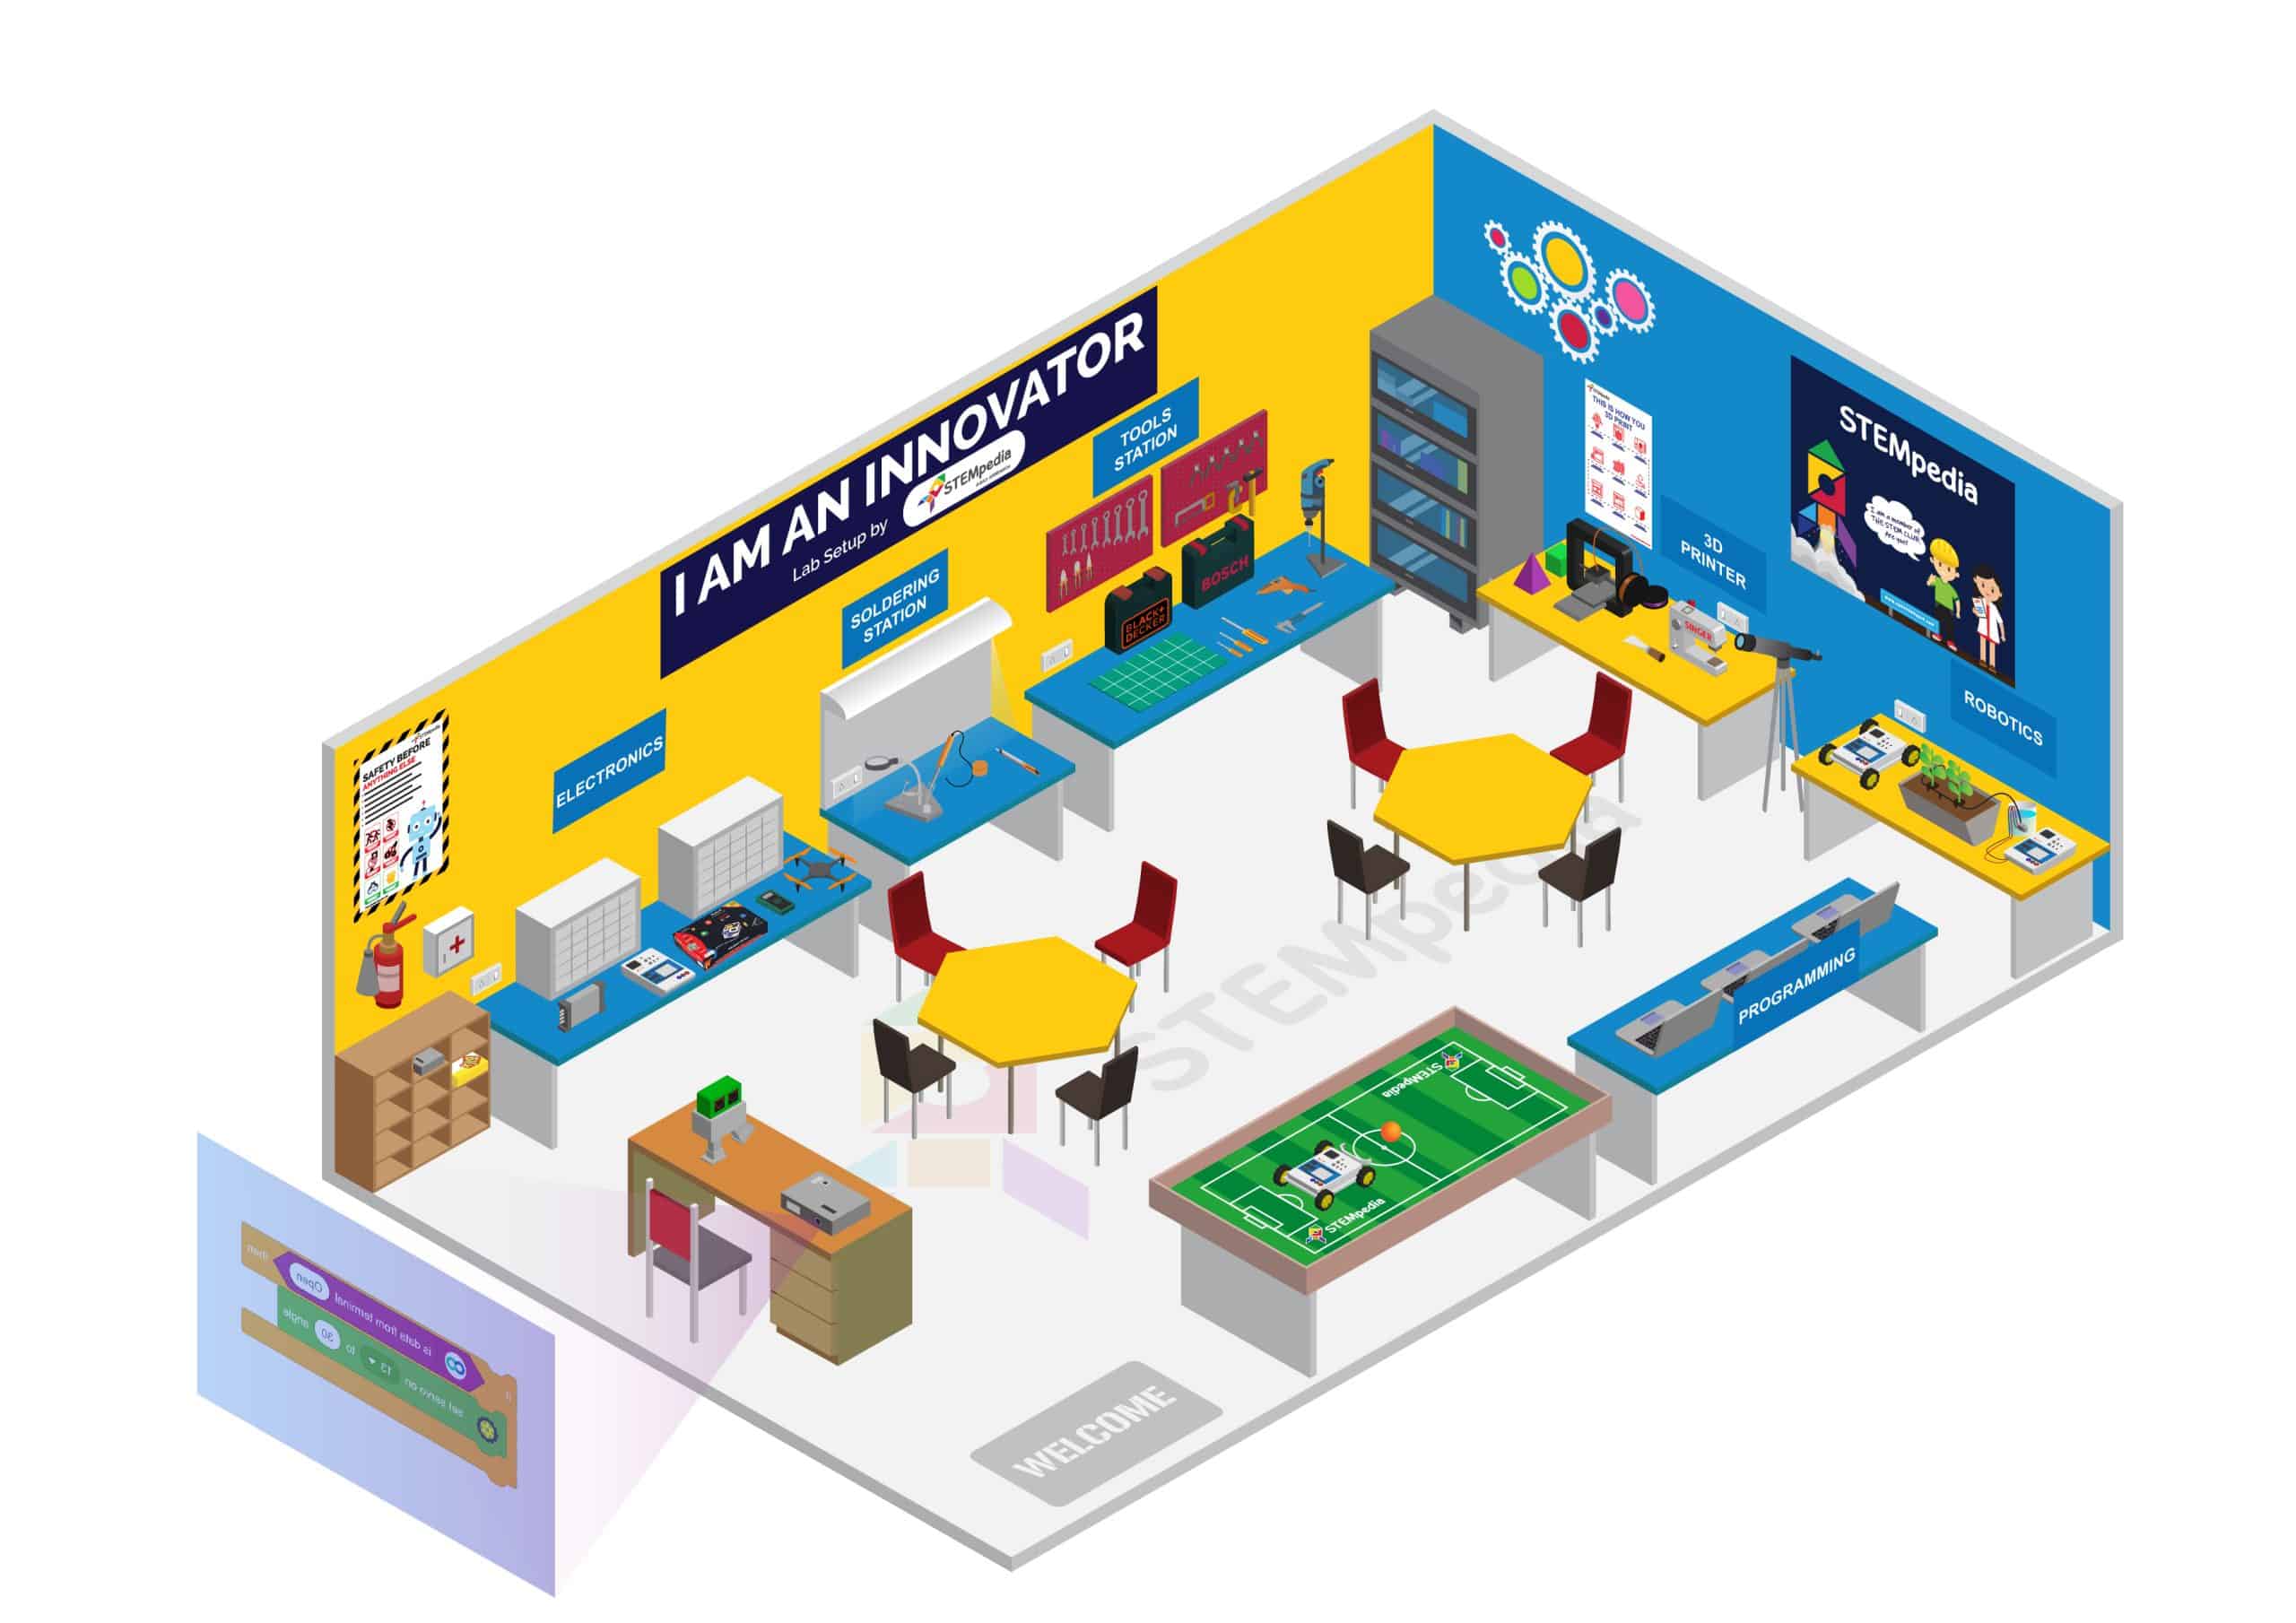 STEM Makerspace Layout